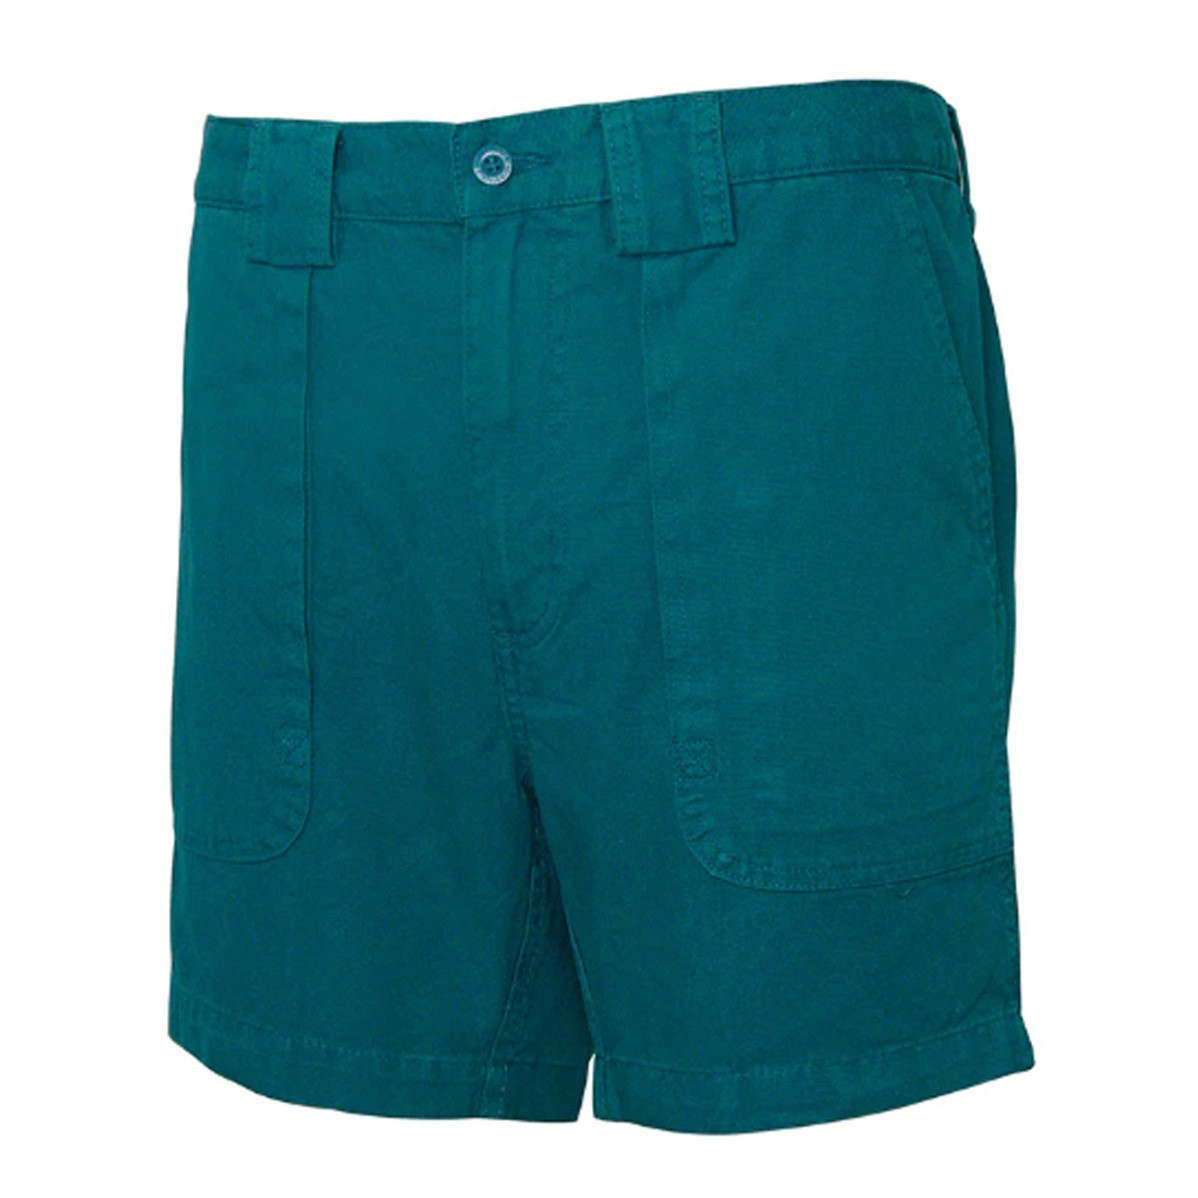 Hook & Tackle - Original Beer Can Island Shorts - (Size 32 - 42 ) (Size: 40, Color: Spruce Green) - Tropaholic